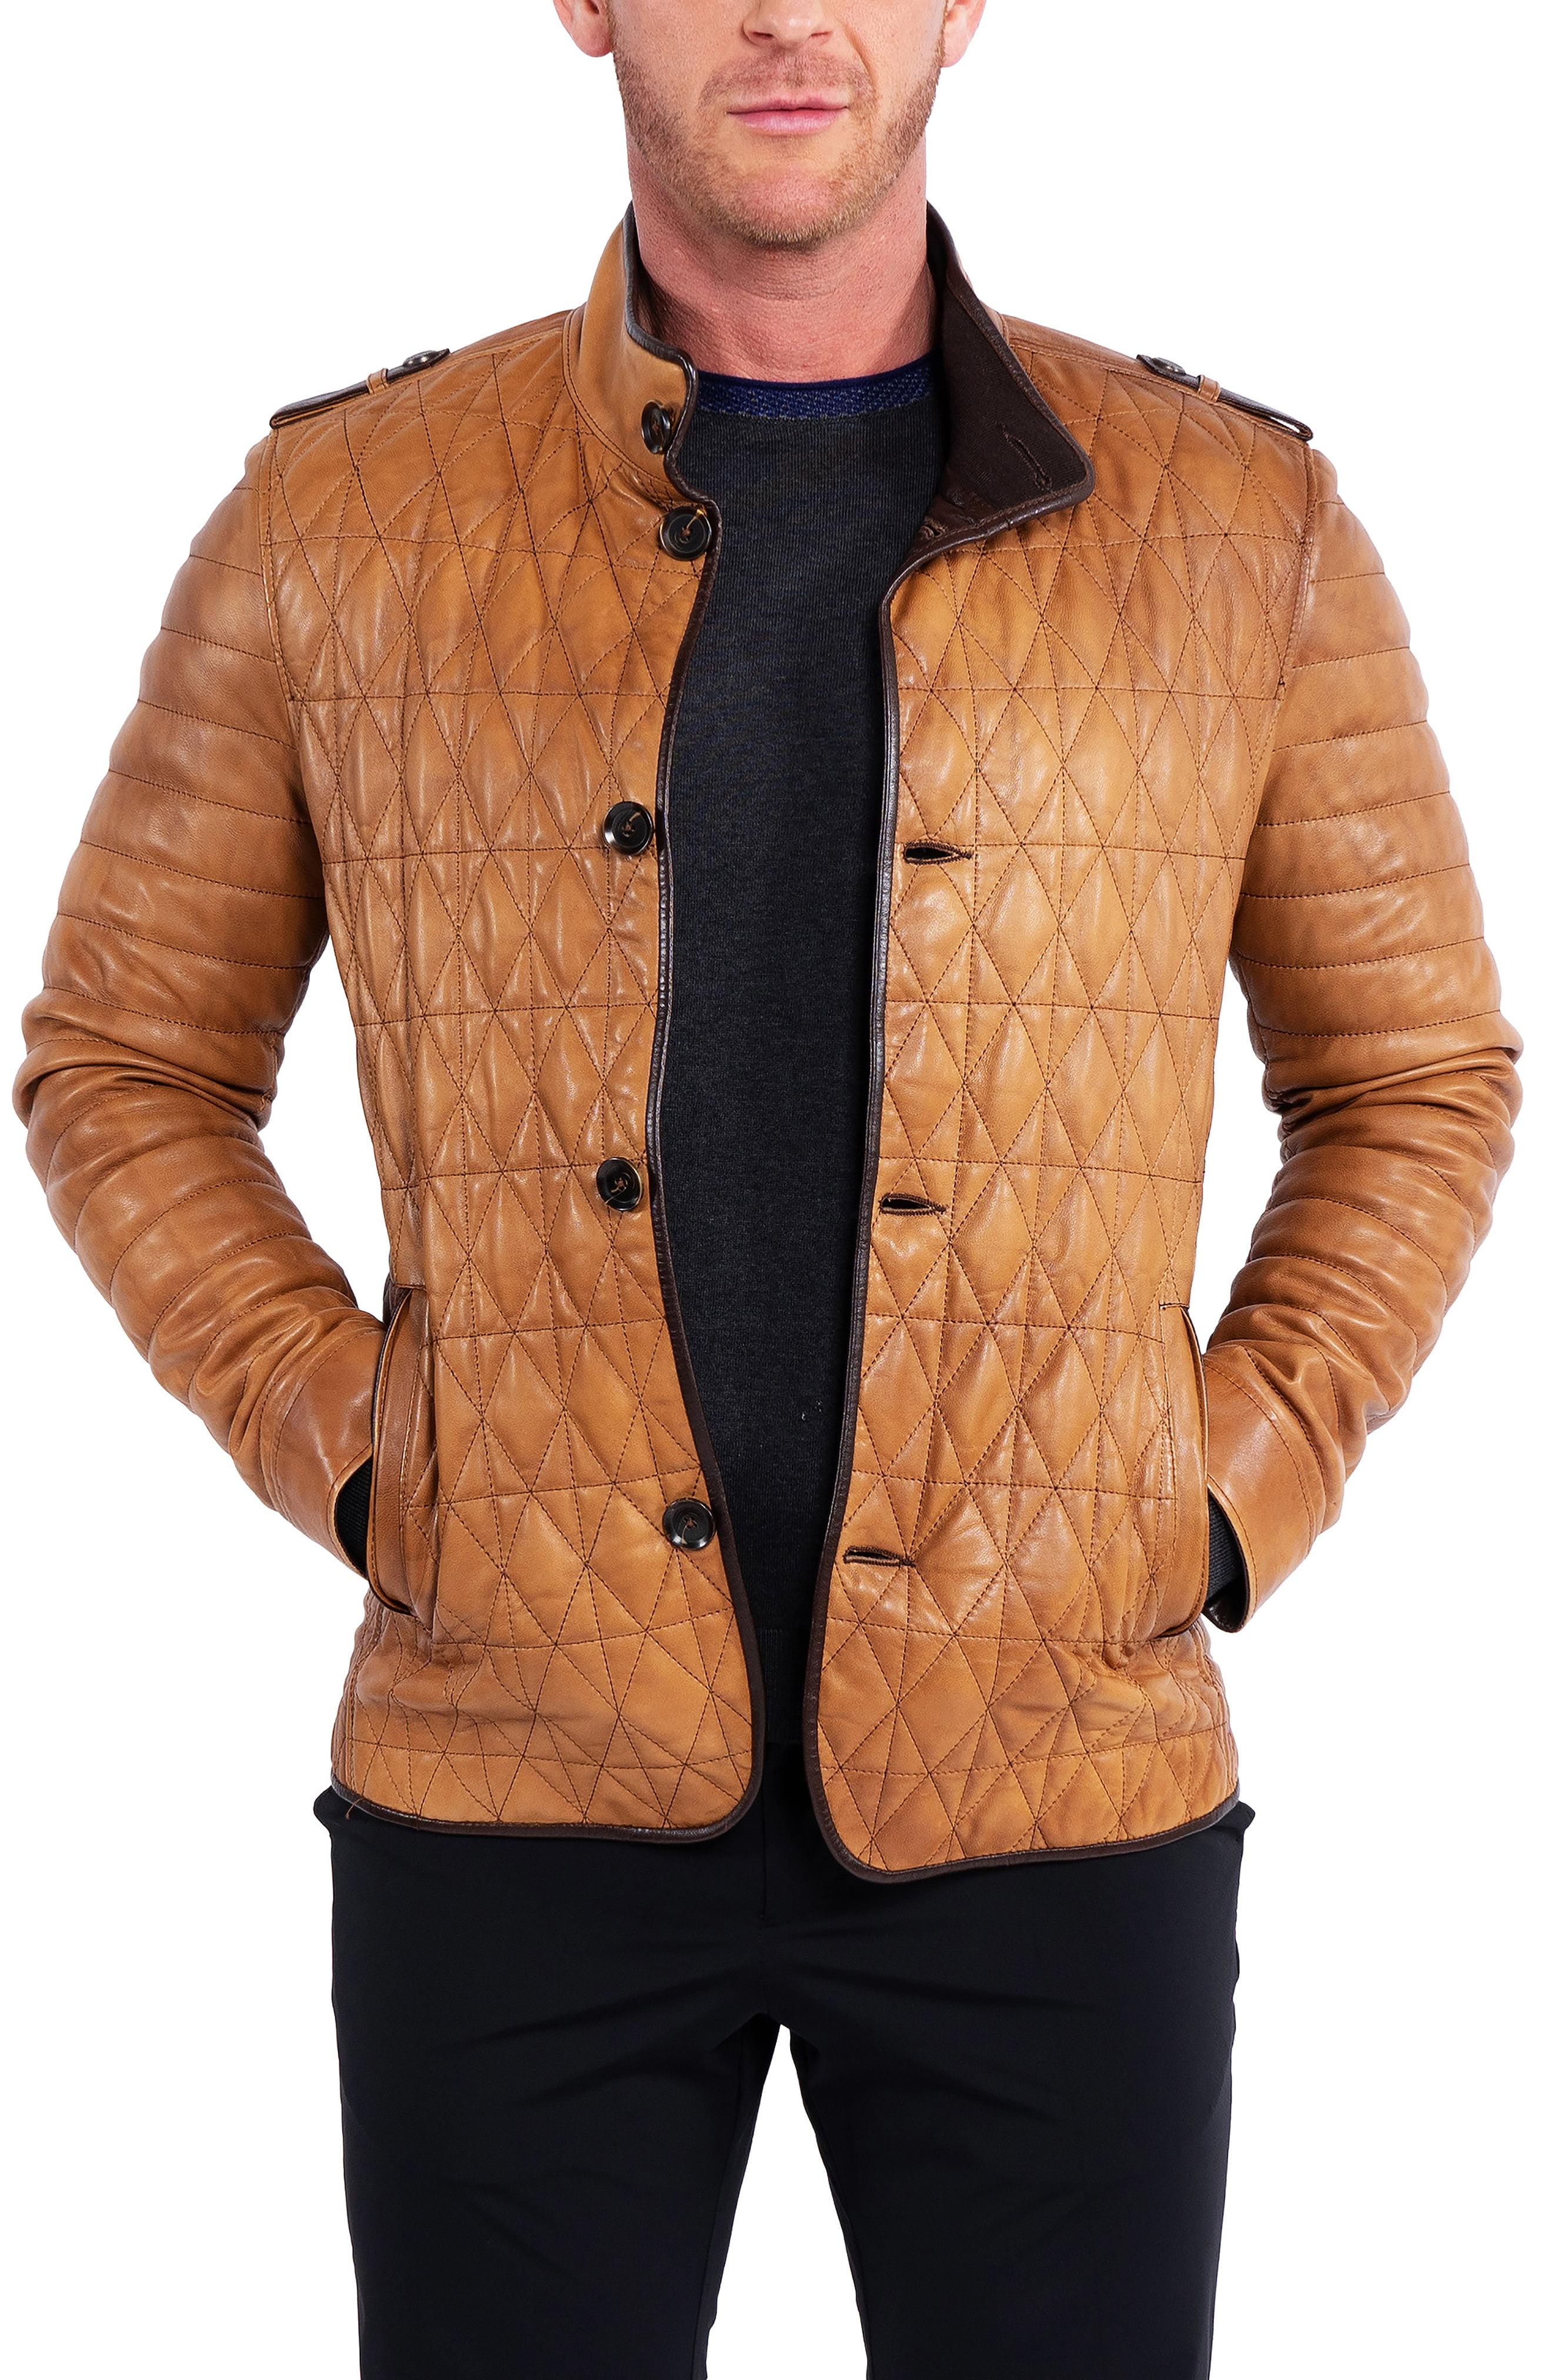 Maceoo Quilted Leather Field Jacket in Brown for Men - Lyst